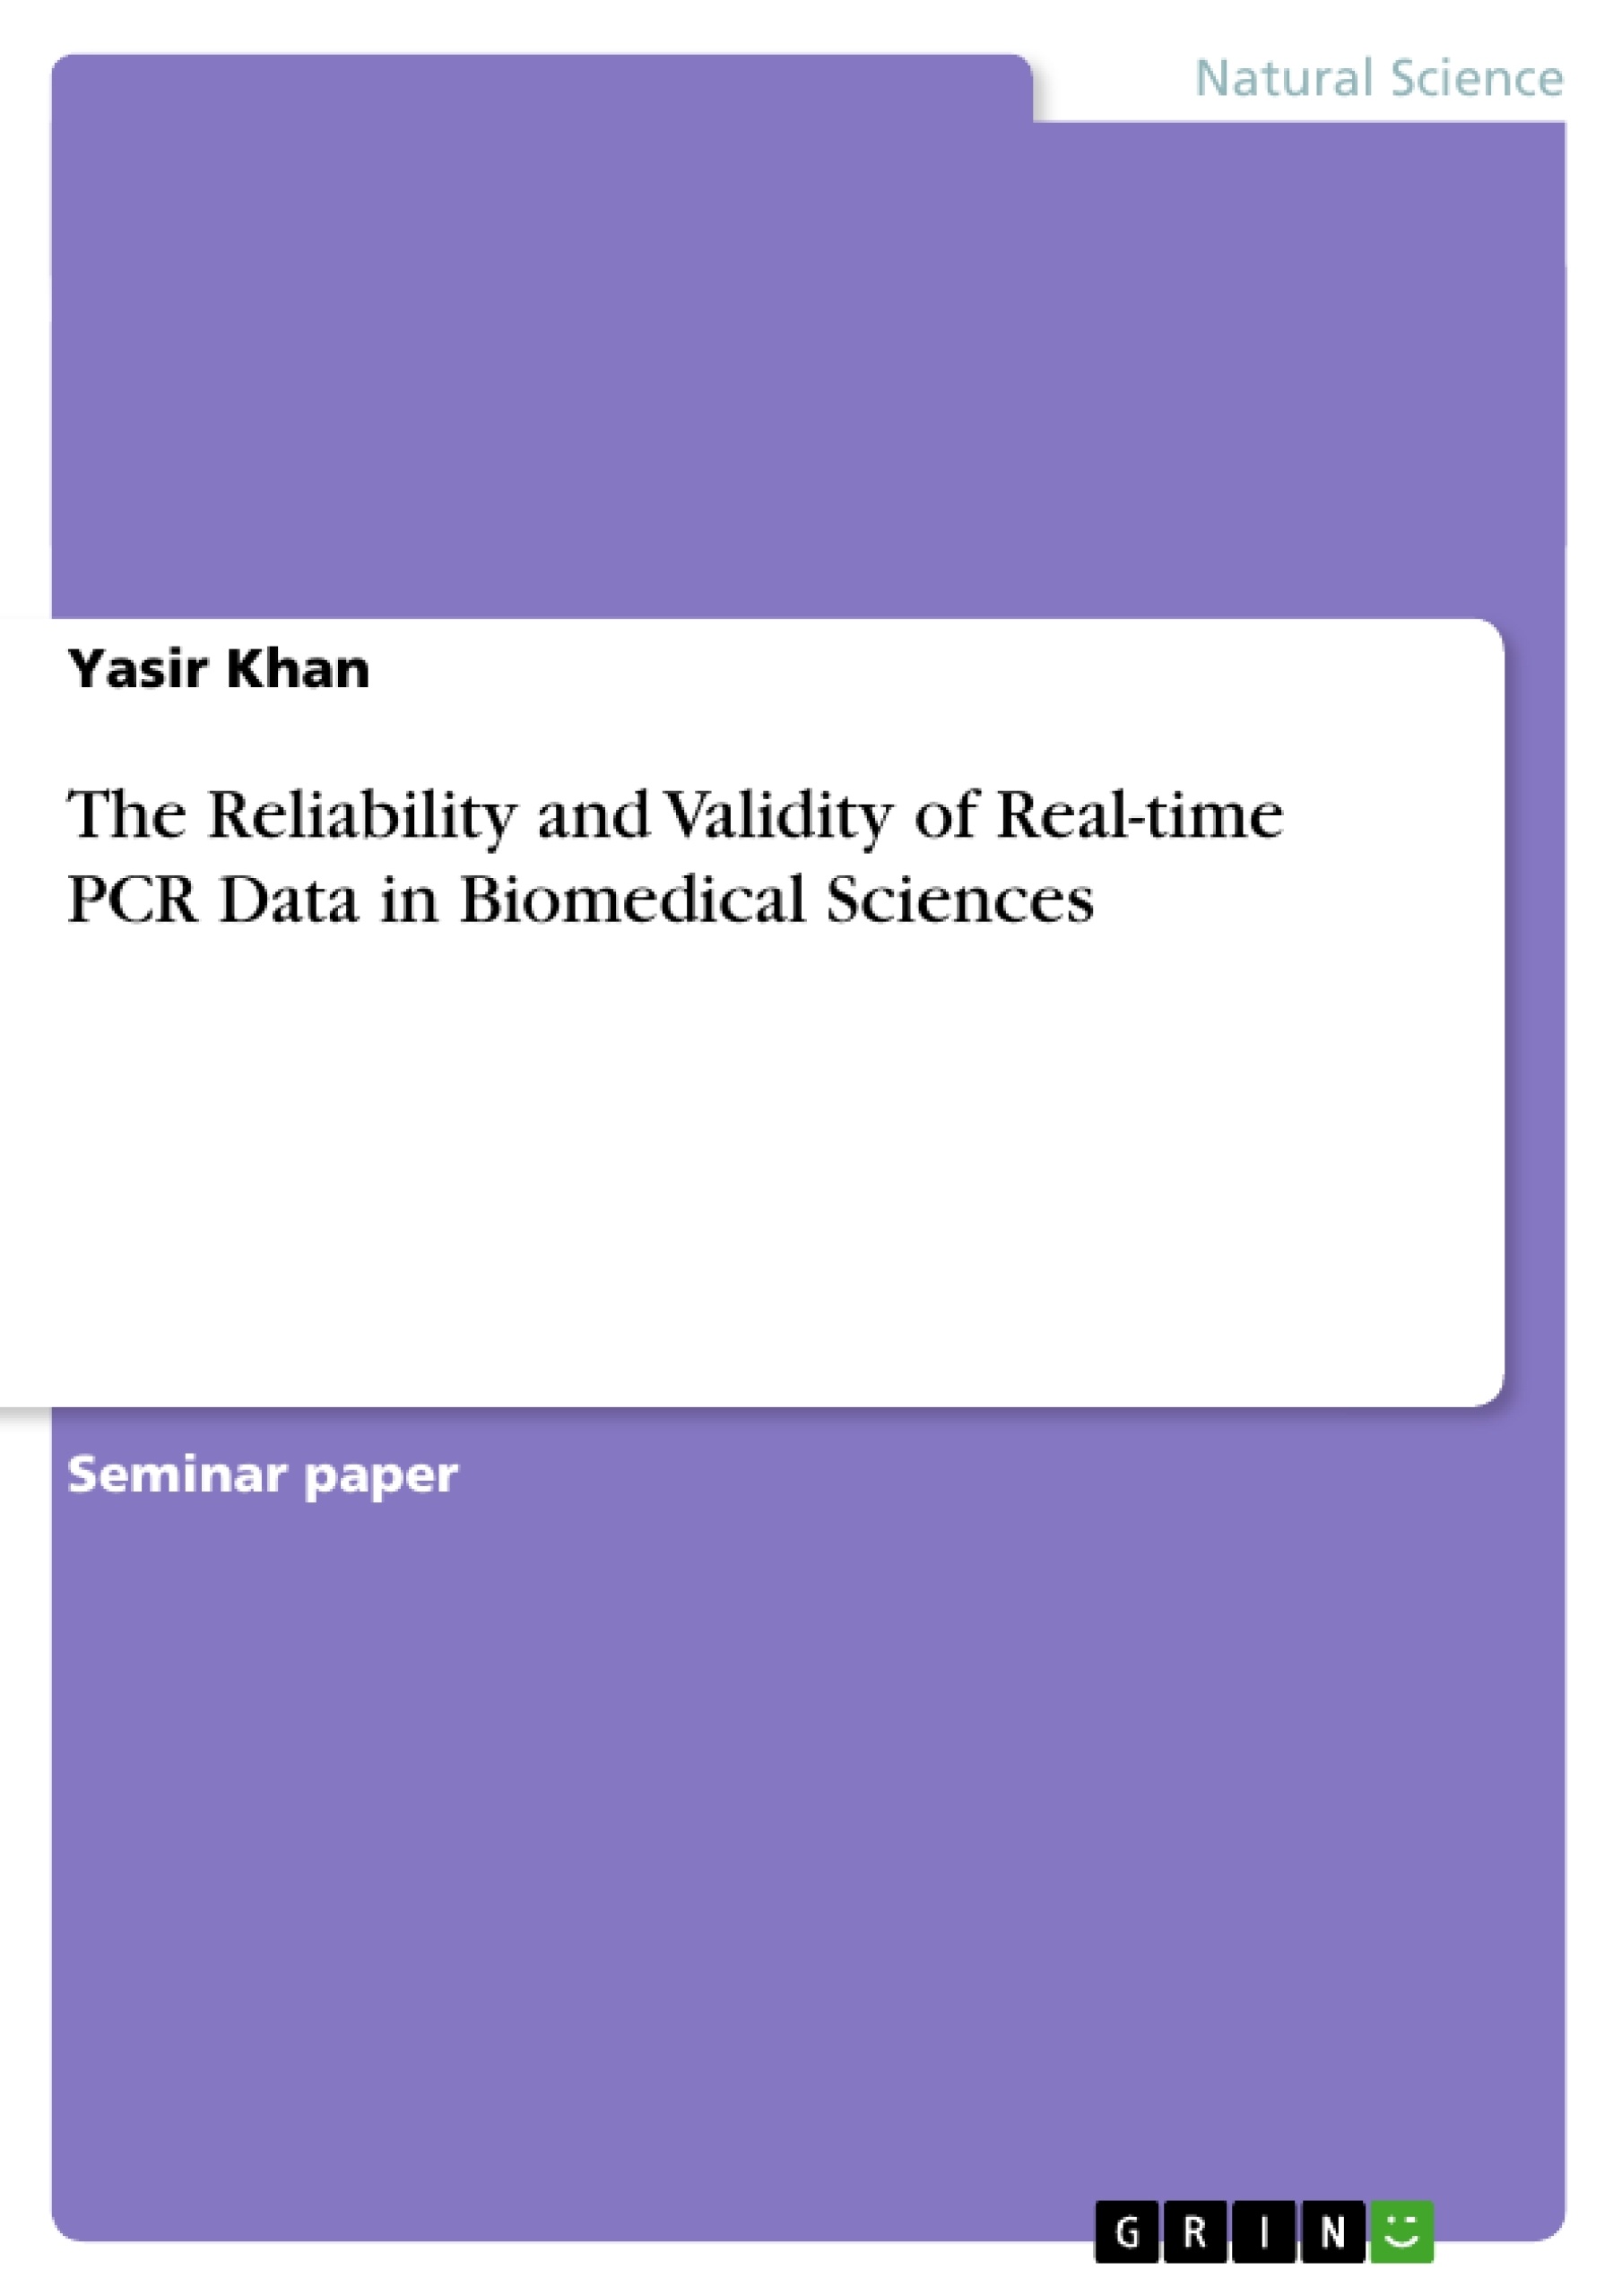 Título: The Reliability and Validity of Real-time PCR Data in Biomedical Sciences